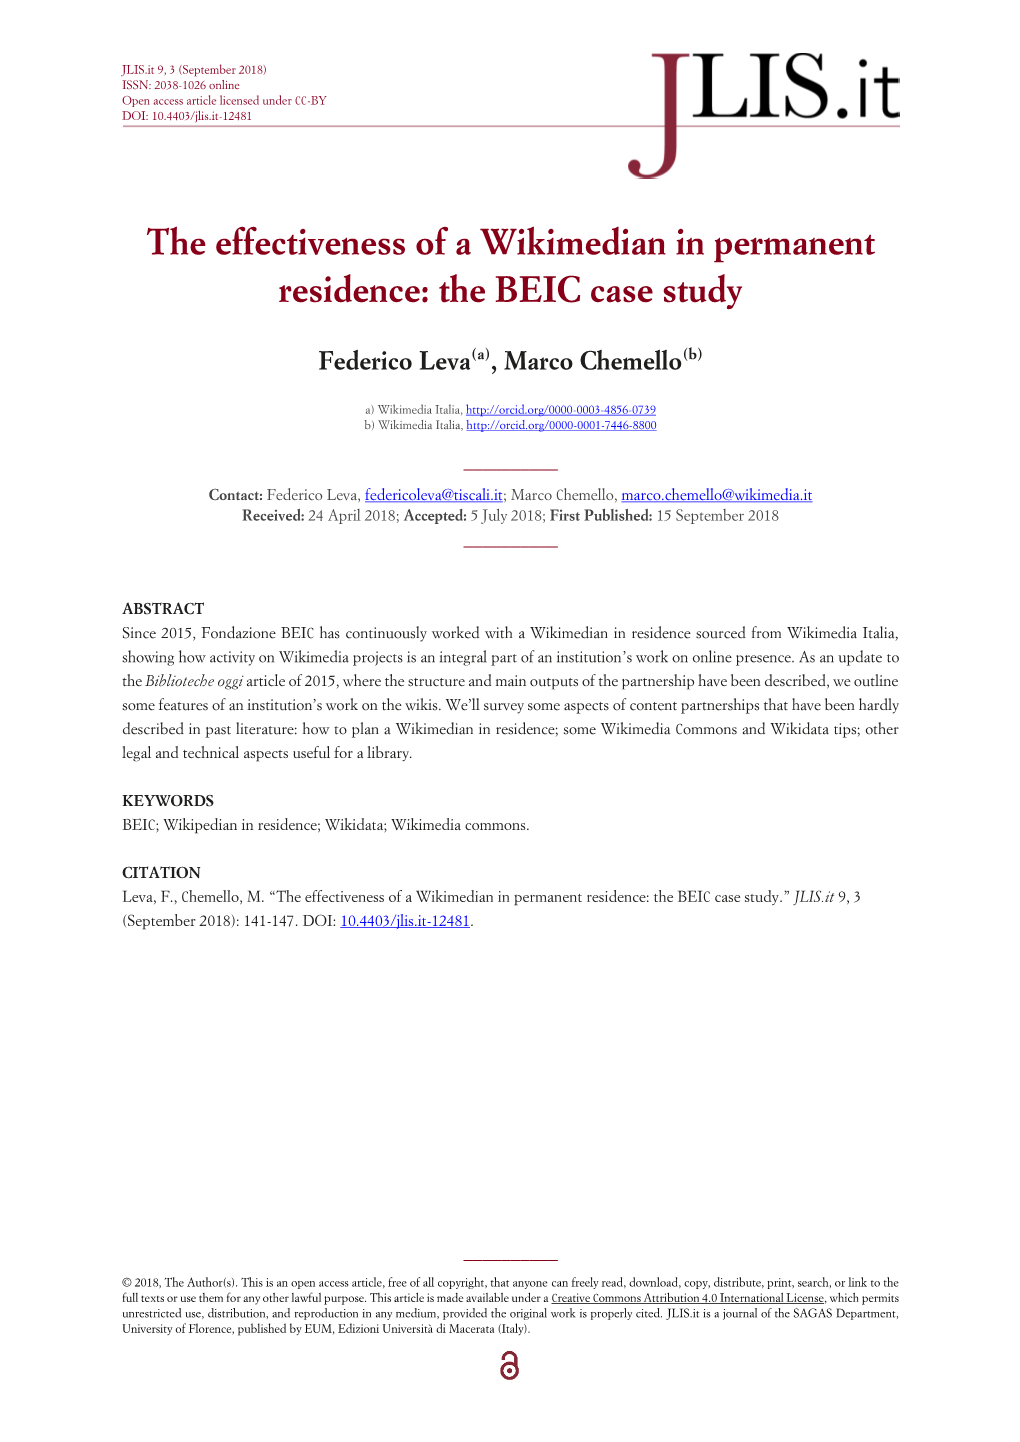 The Effectiveness of a Wikimedian in Permanent Residence: the BEIC Case Study